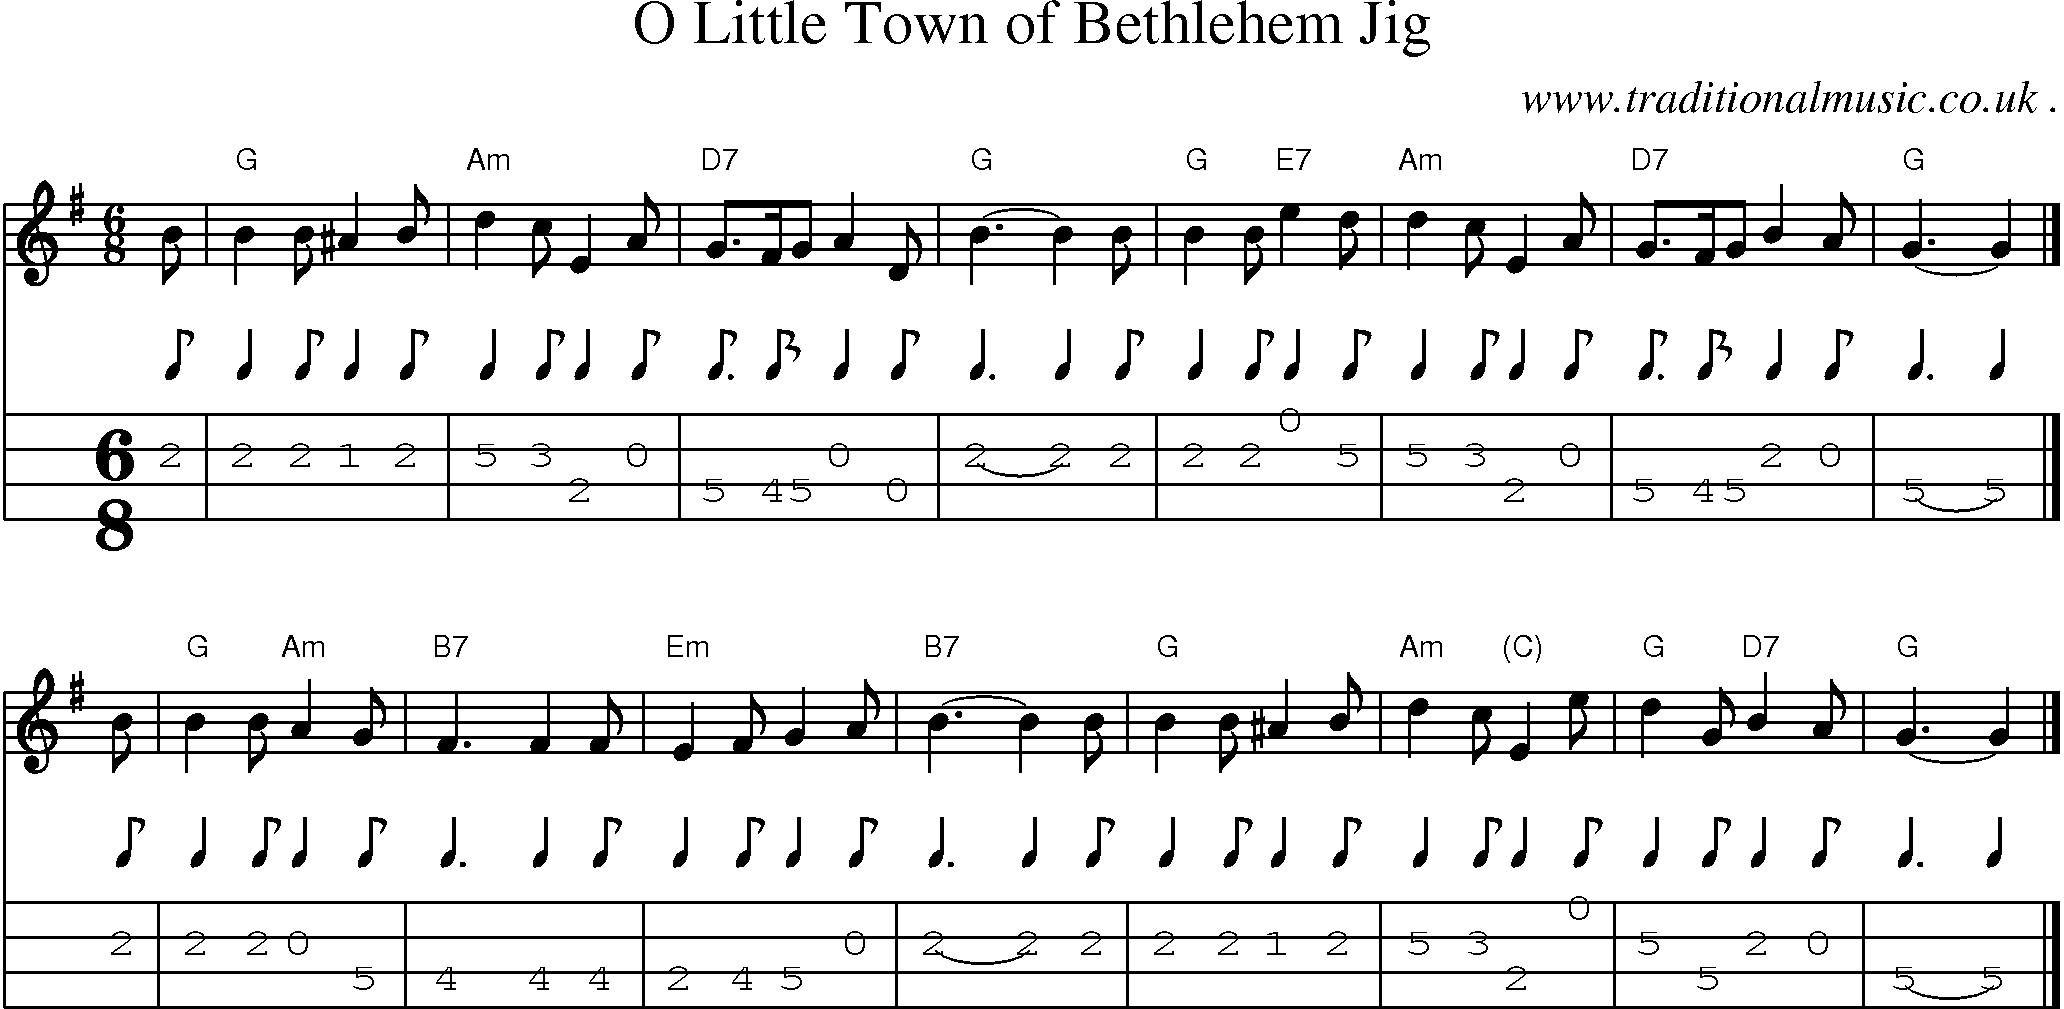 Sheet-music  score, Chords and Mandolin Tabs for O Little Town Of Bethlehem Jig